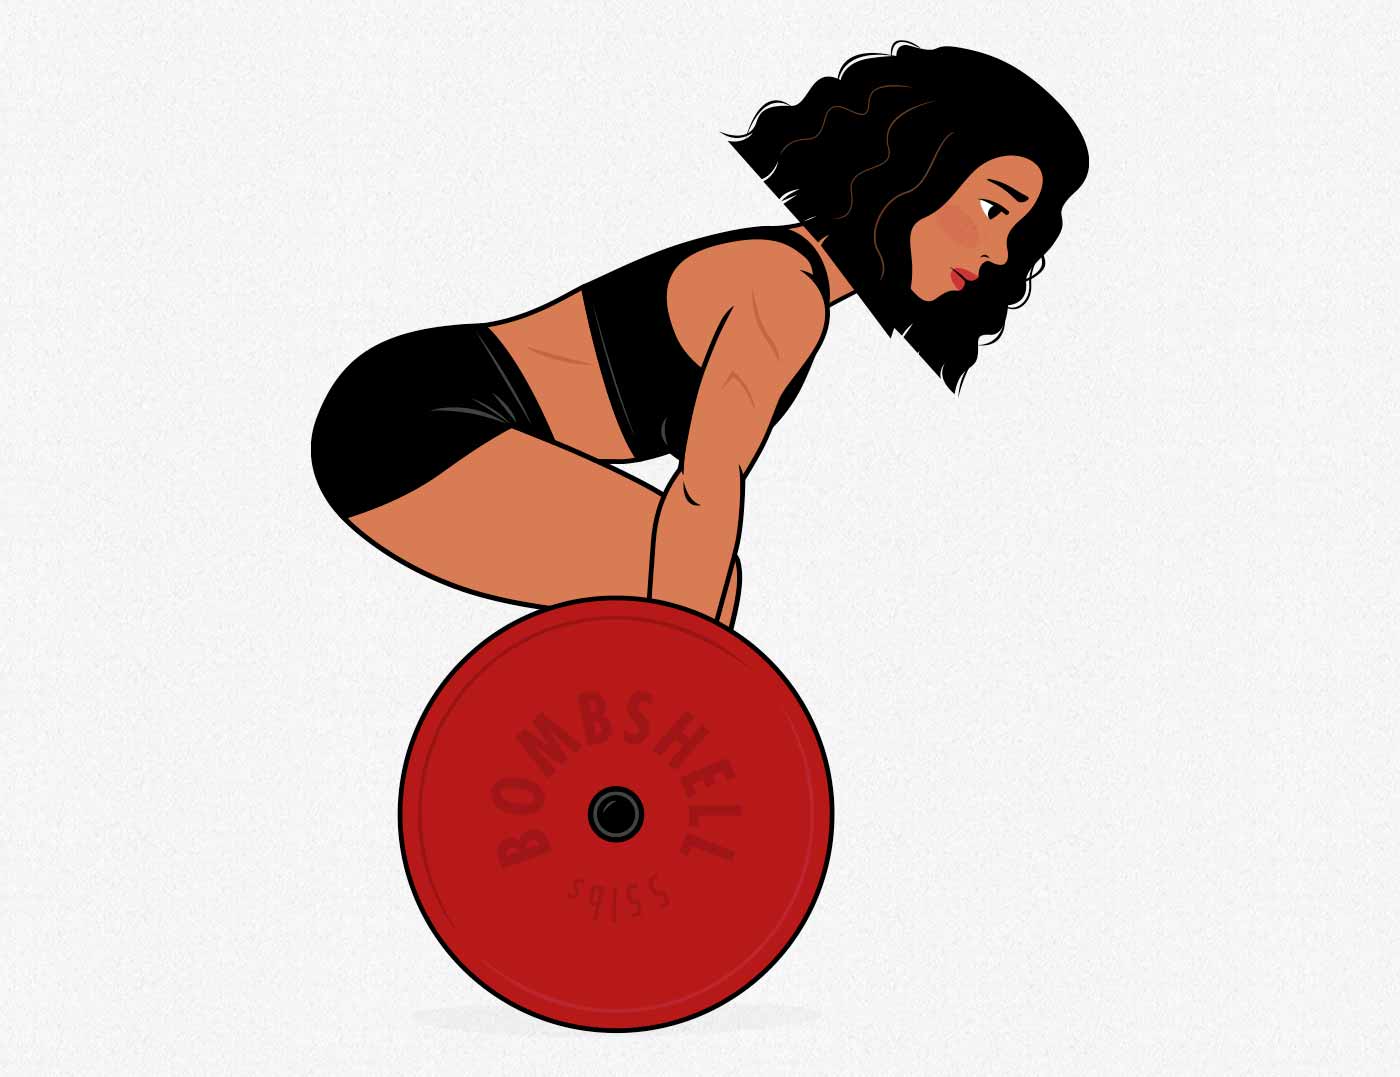 Bony to Bombshell illustration of a woman doing barbell deadlifts to build bigger hips and gain strength.